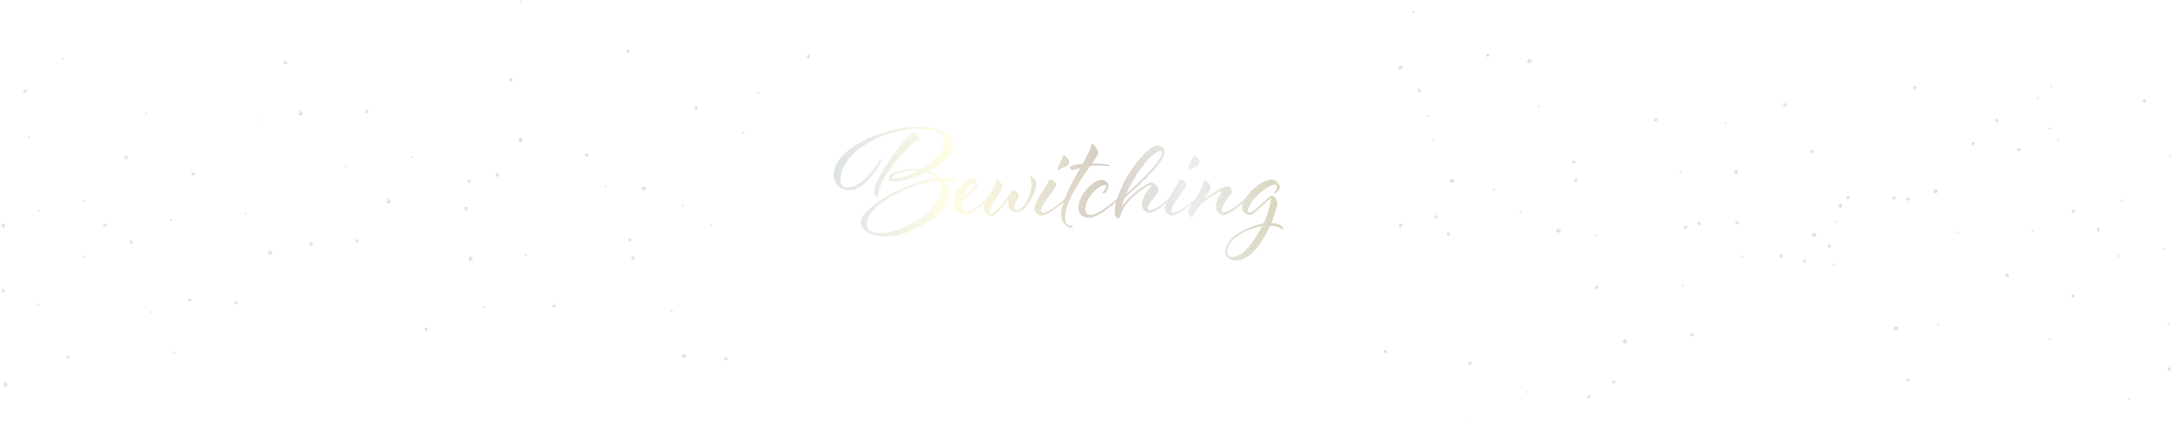 Bewitching Basements - Title